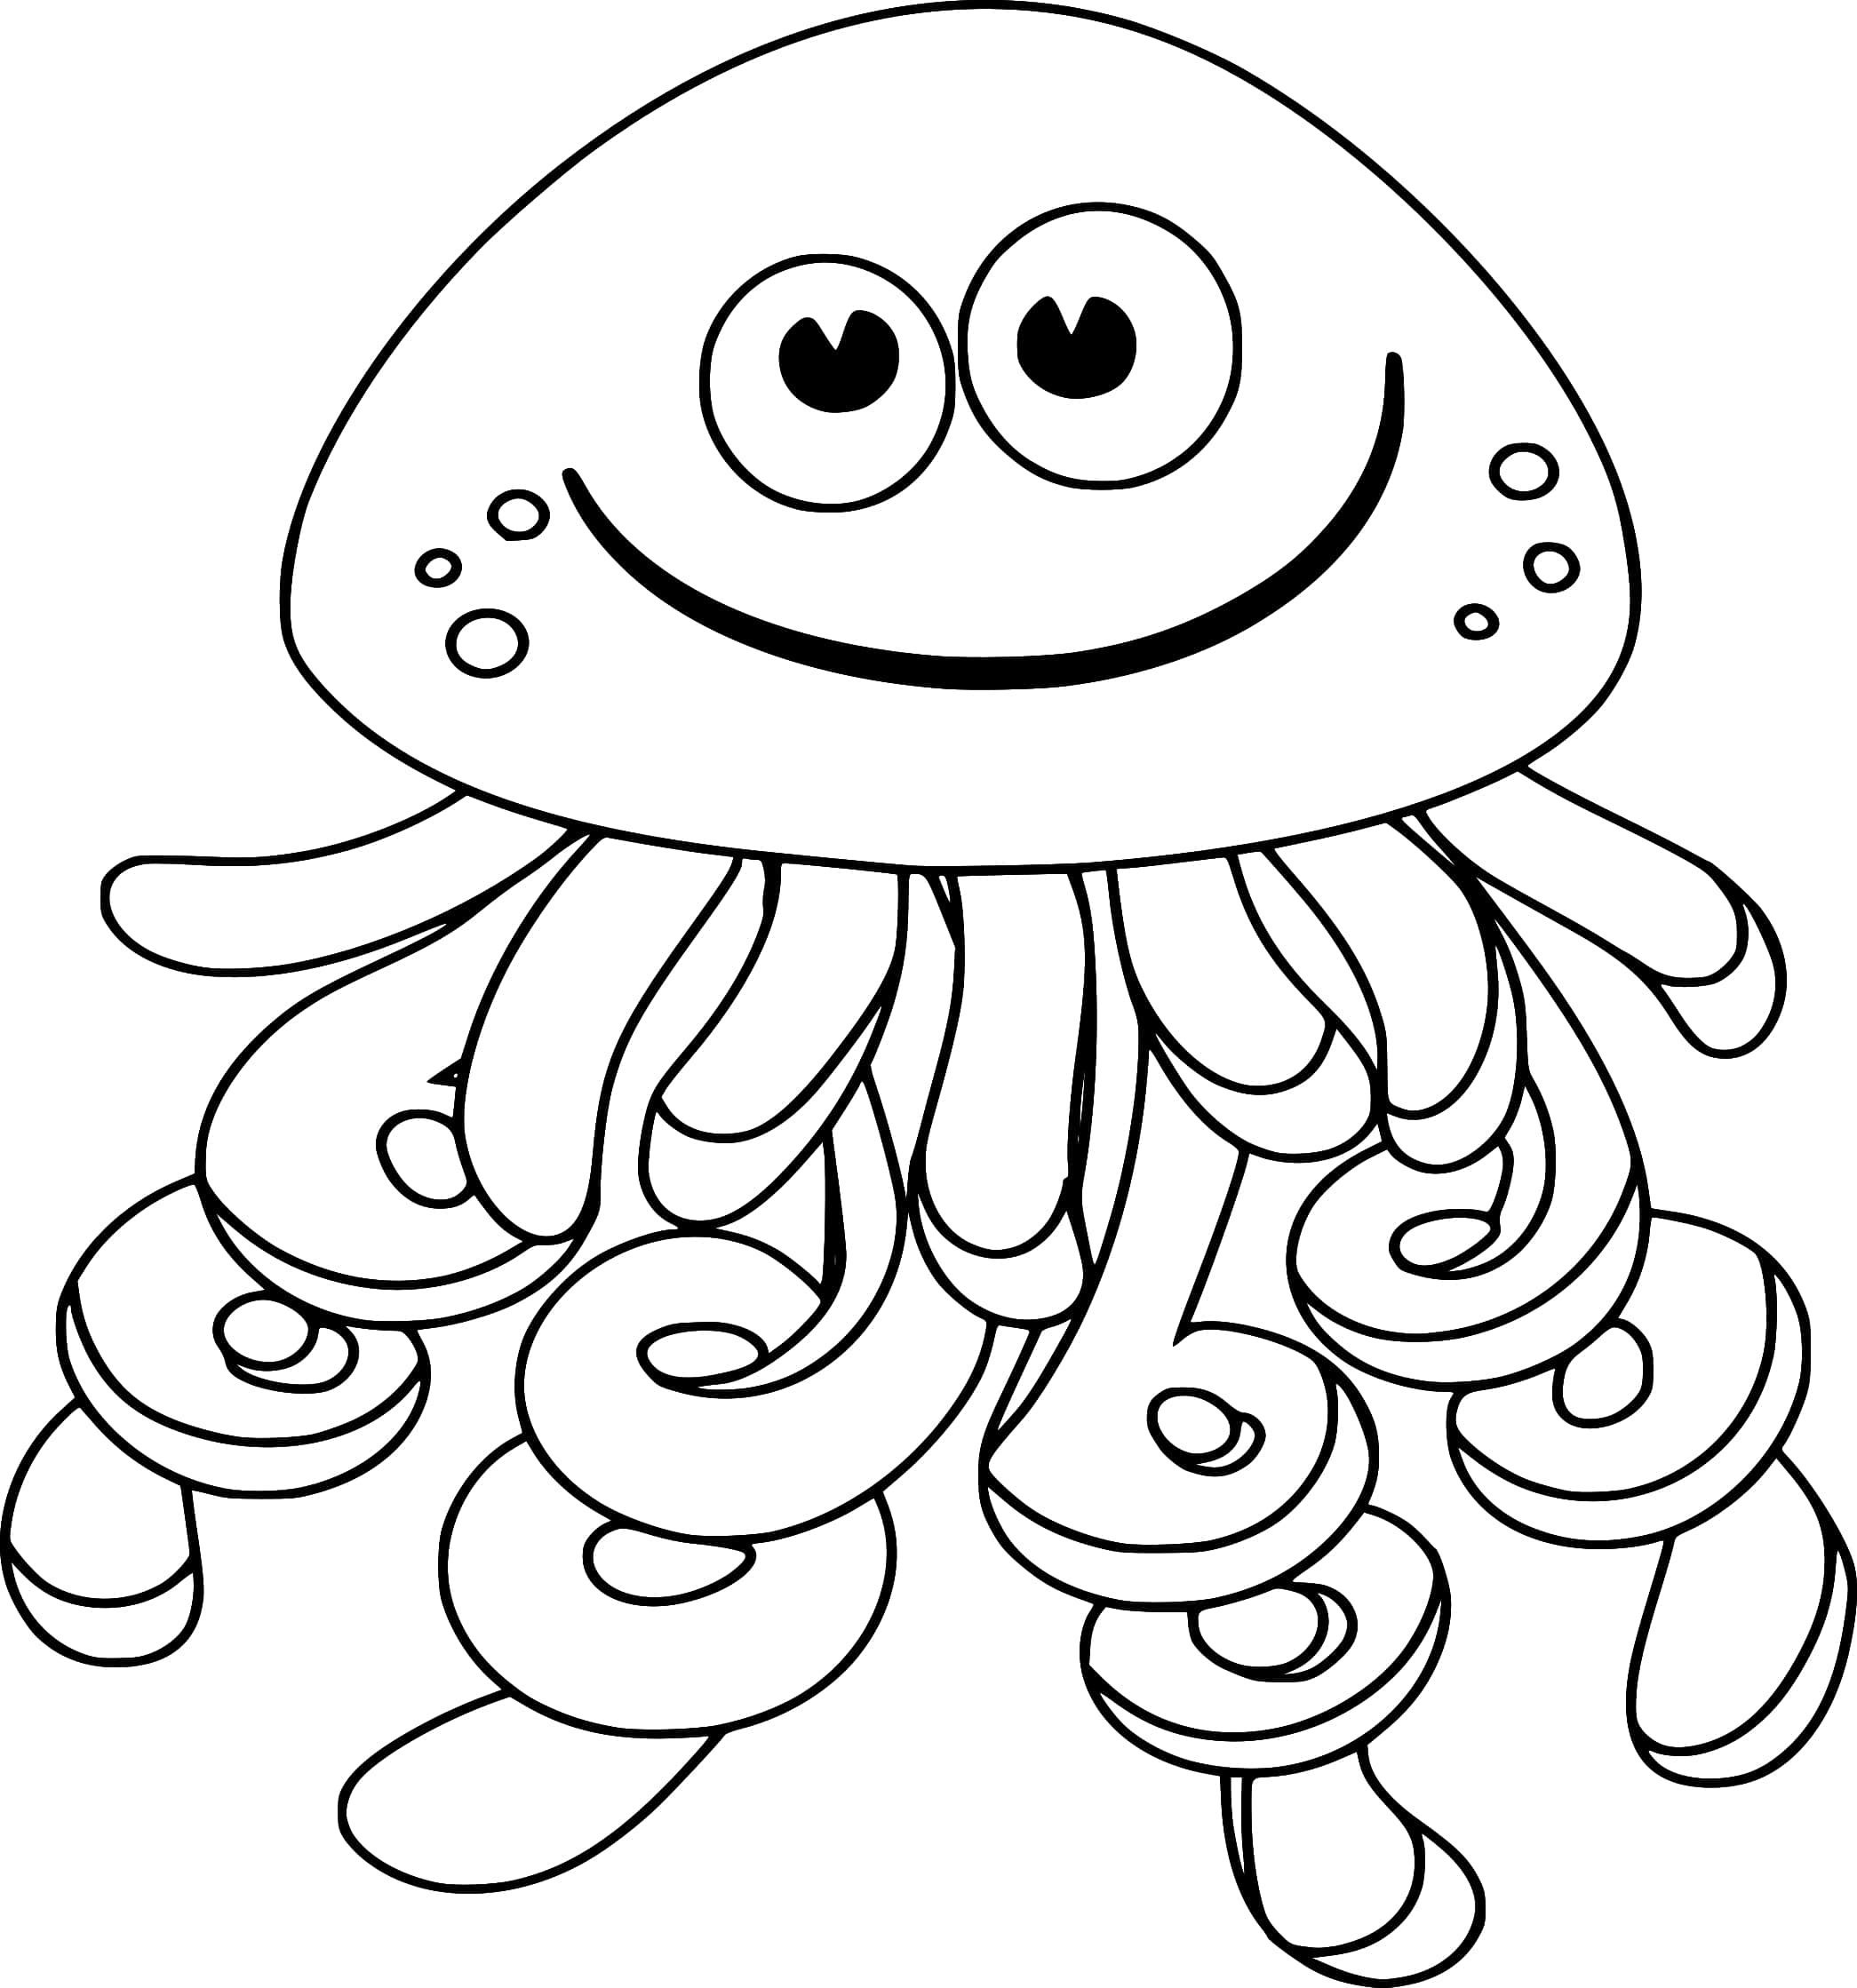 20 PRINTABLE Sea Animal Coloring Pages For Kids | Etsy